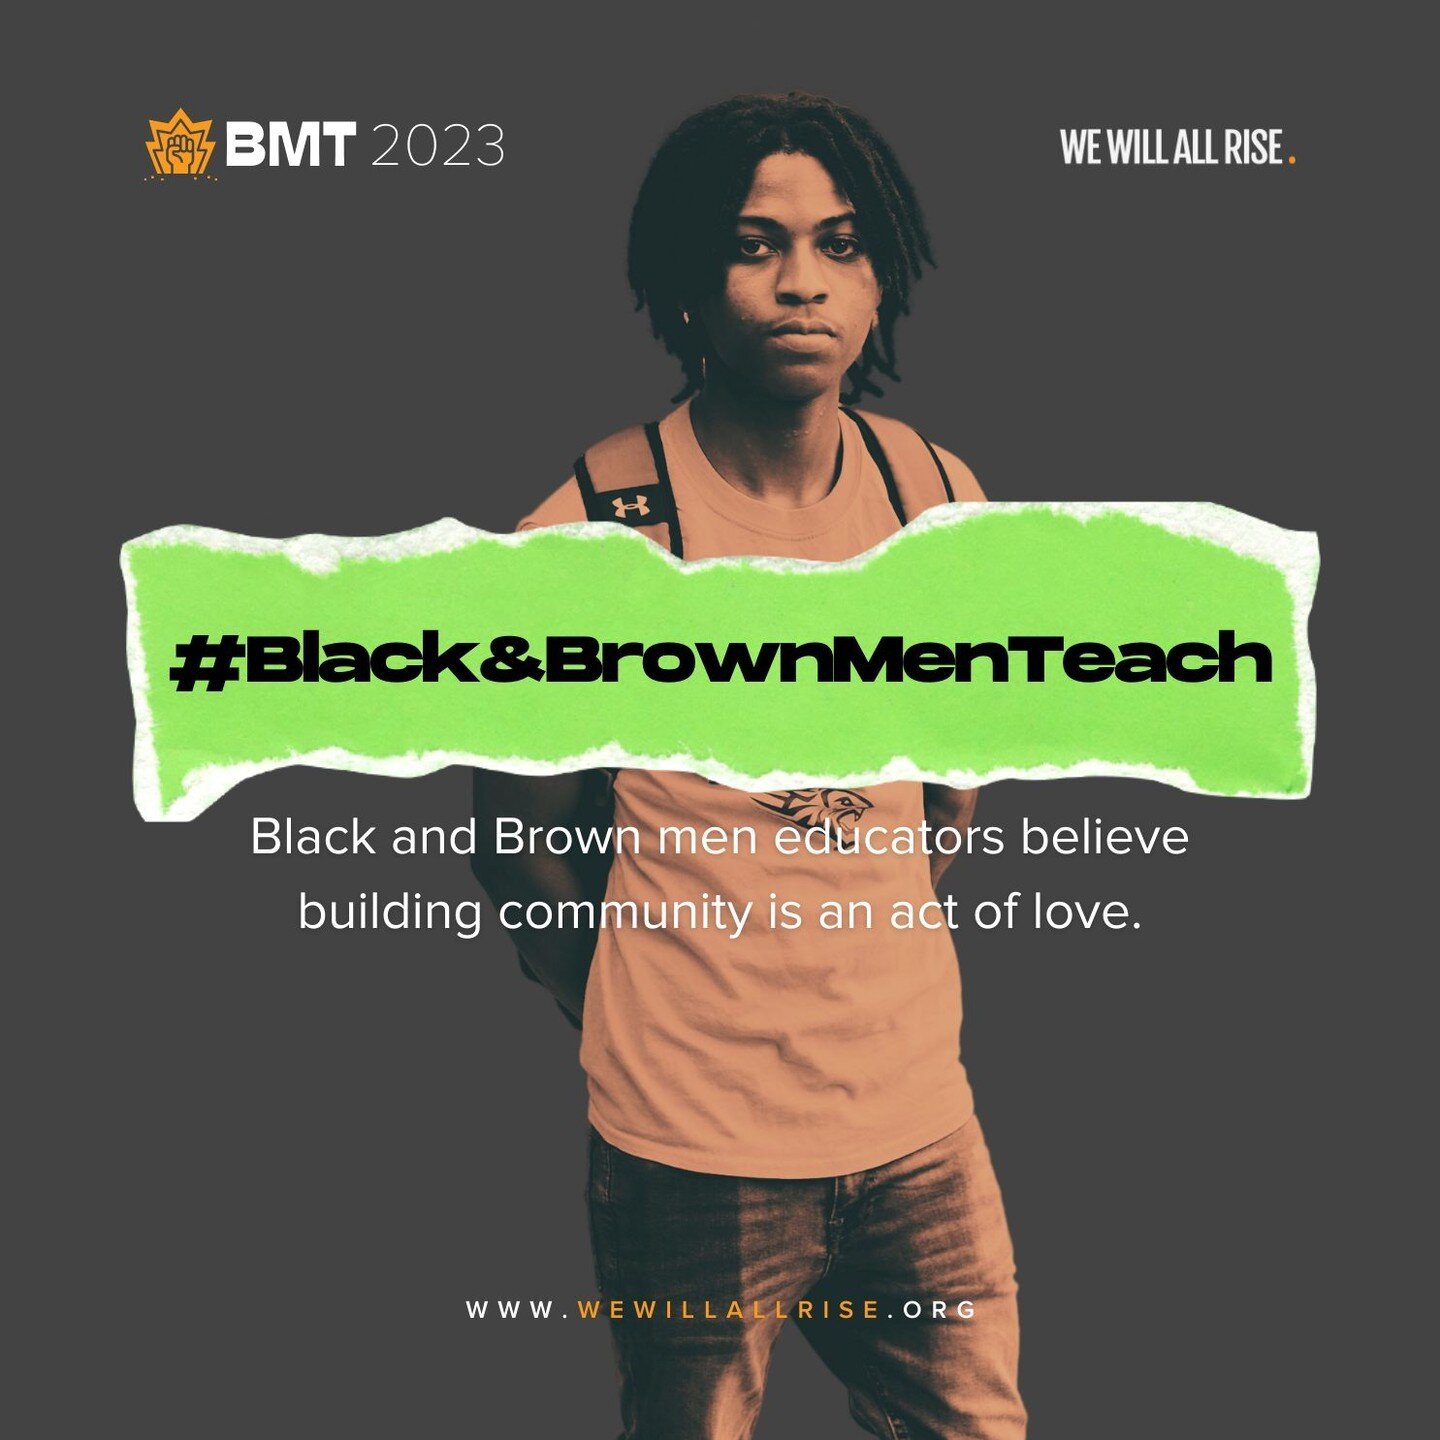 We Will All Rise works to increase the representation of Black and Brown men educators in classrooms and school buildings in the regions where we operate. In Baltimore, we partner with the Mayor&rsquo;s Office of Children and Family Success, Baltimor